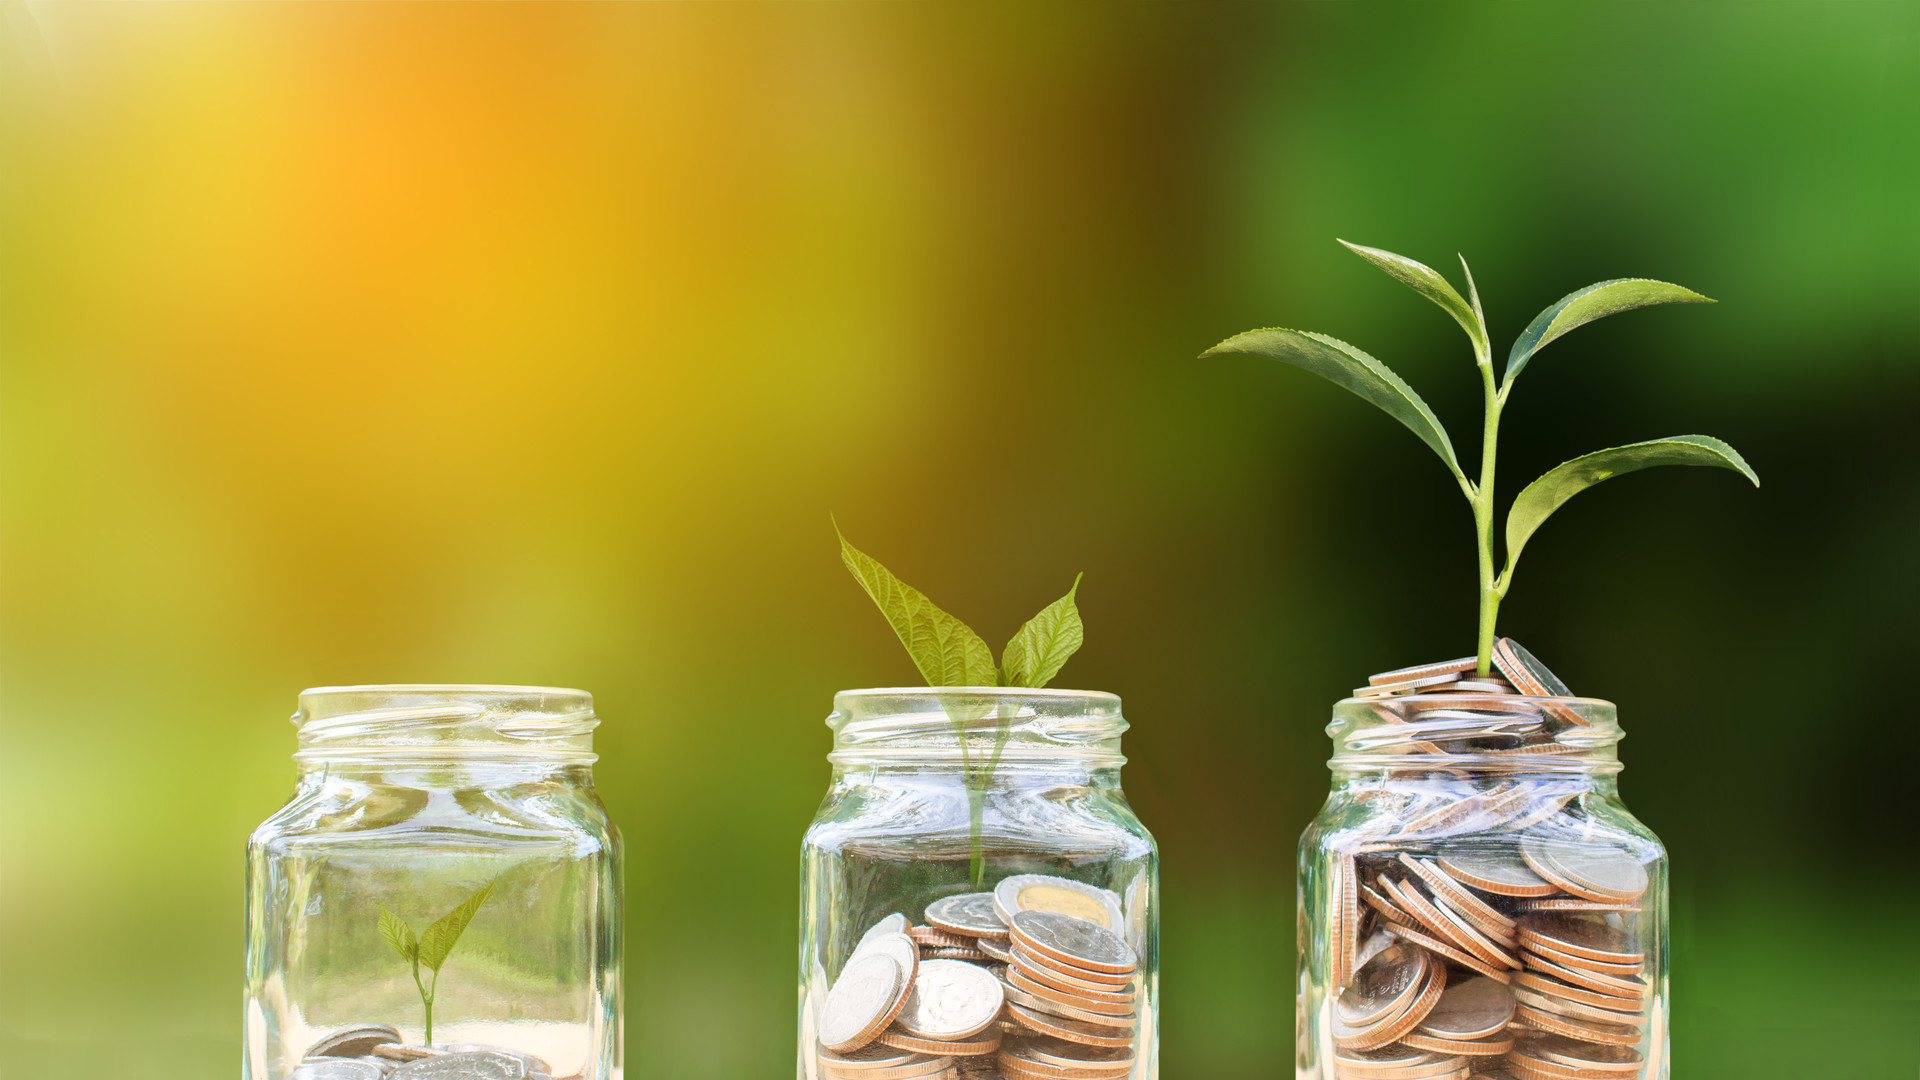 Conceptual coins in glass bottle and growing tree on nature background,Business investment growth concept